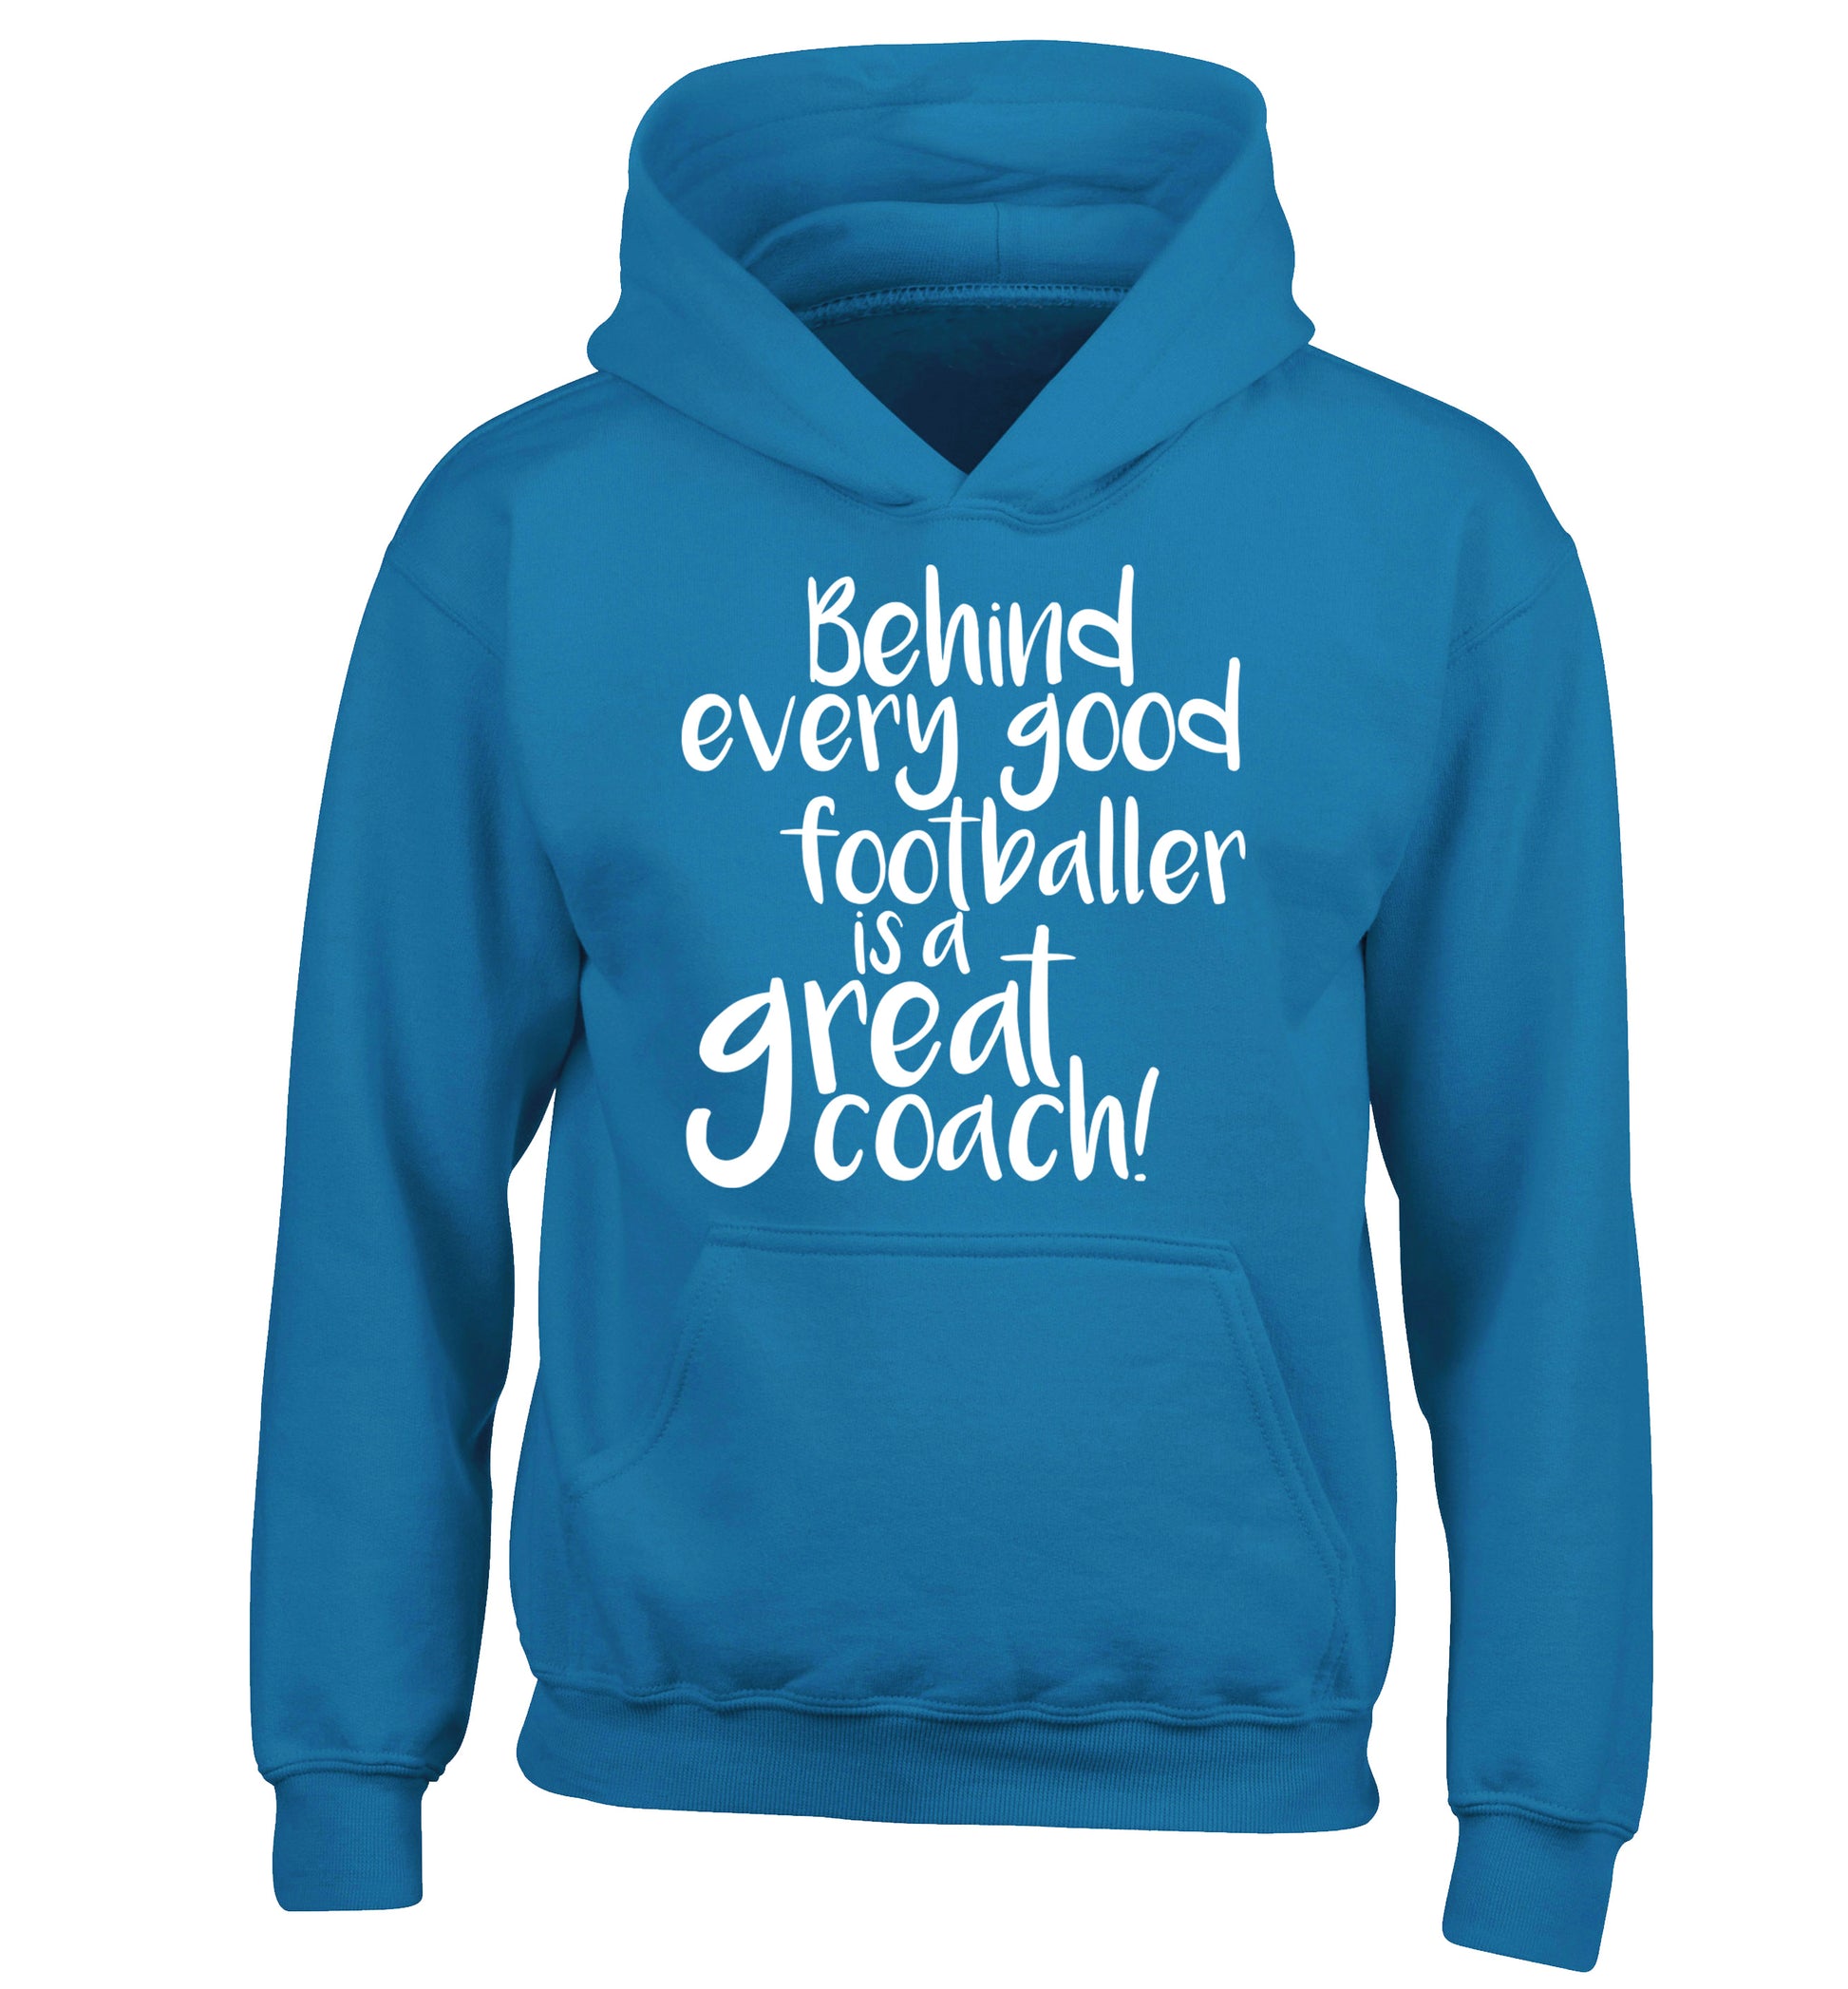 Behind every good footballer is a great coach! children's blue hoodie 12-14 Years